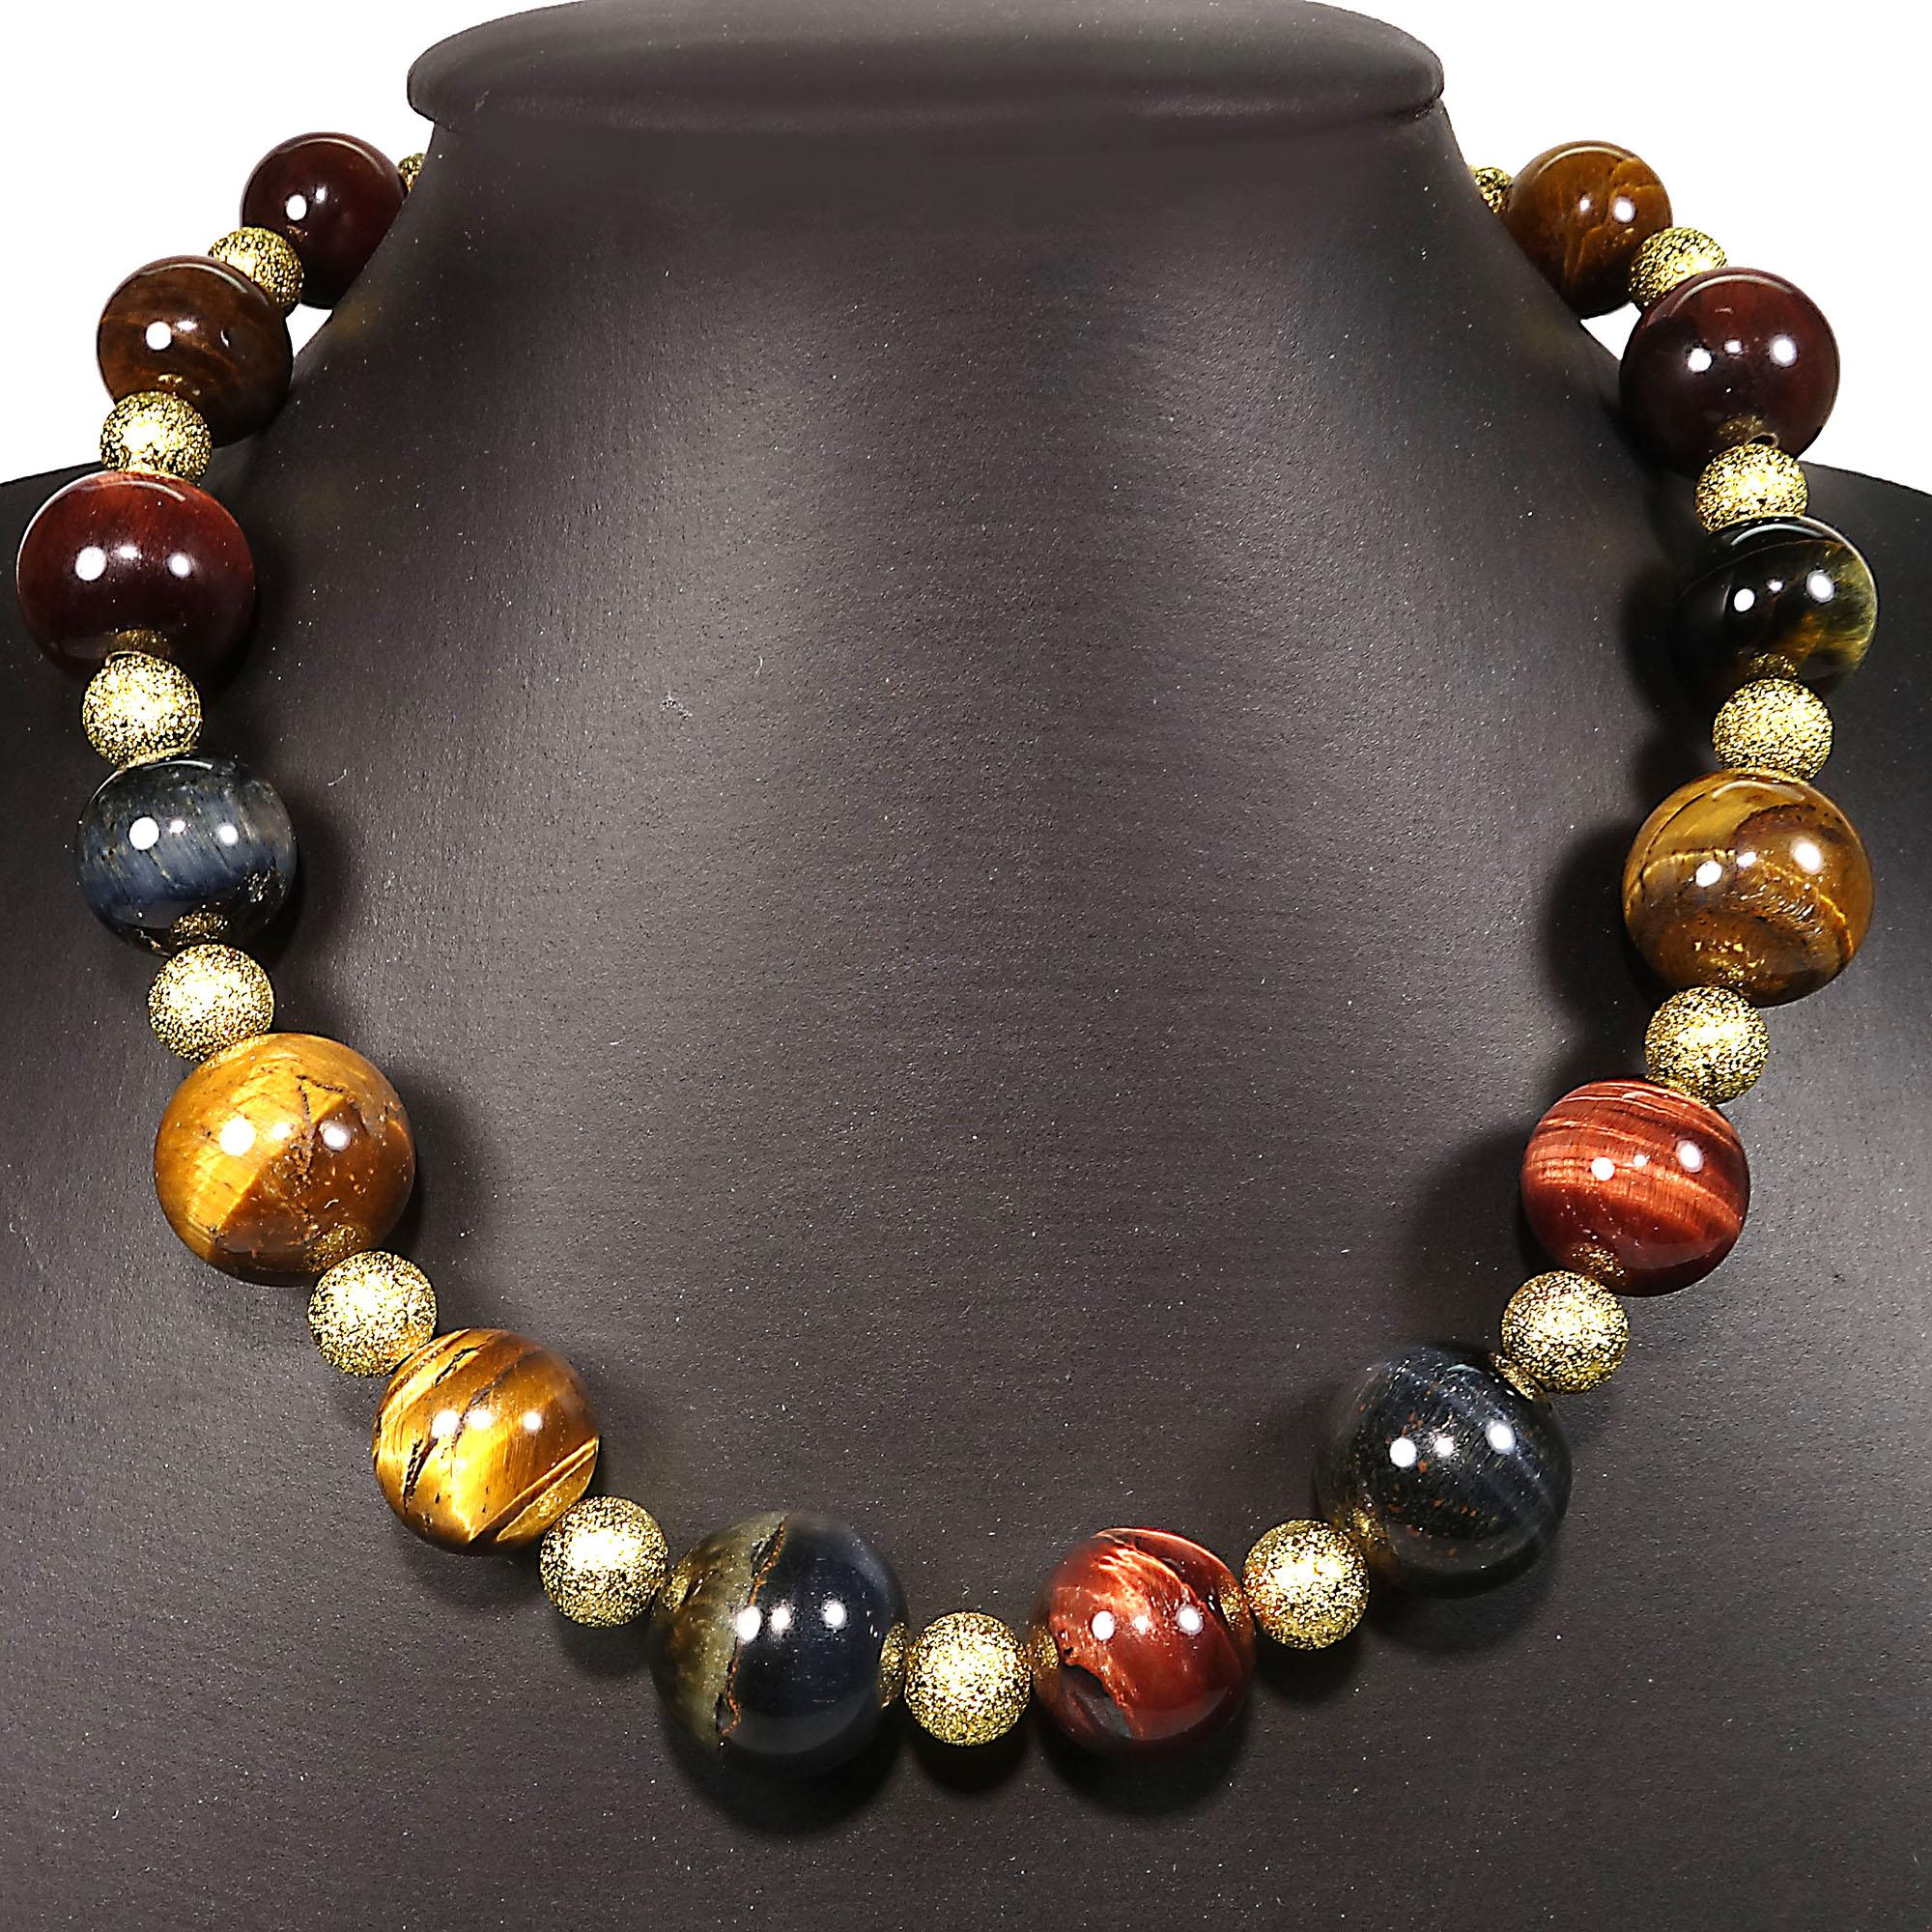 Elegant, multi color Tiger's Eye necklace in chatoyant shades of red, blue, and brown. This handmade necklace is so perfect for all occasions with the two sizes of Tiger's Eye and frosted gold tone spacers.  It is 16 inches in length and just sits